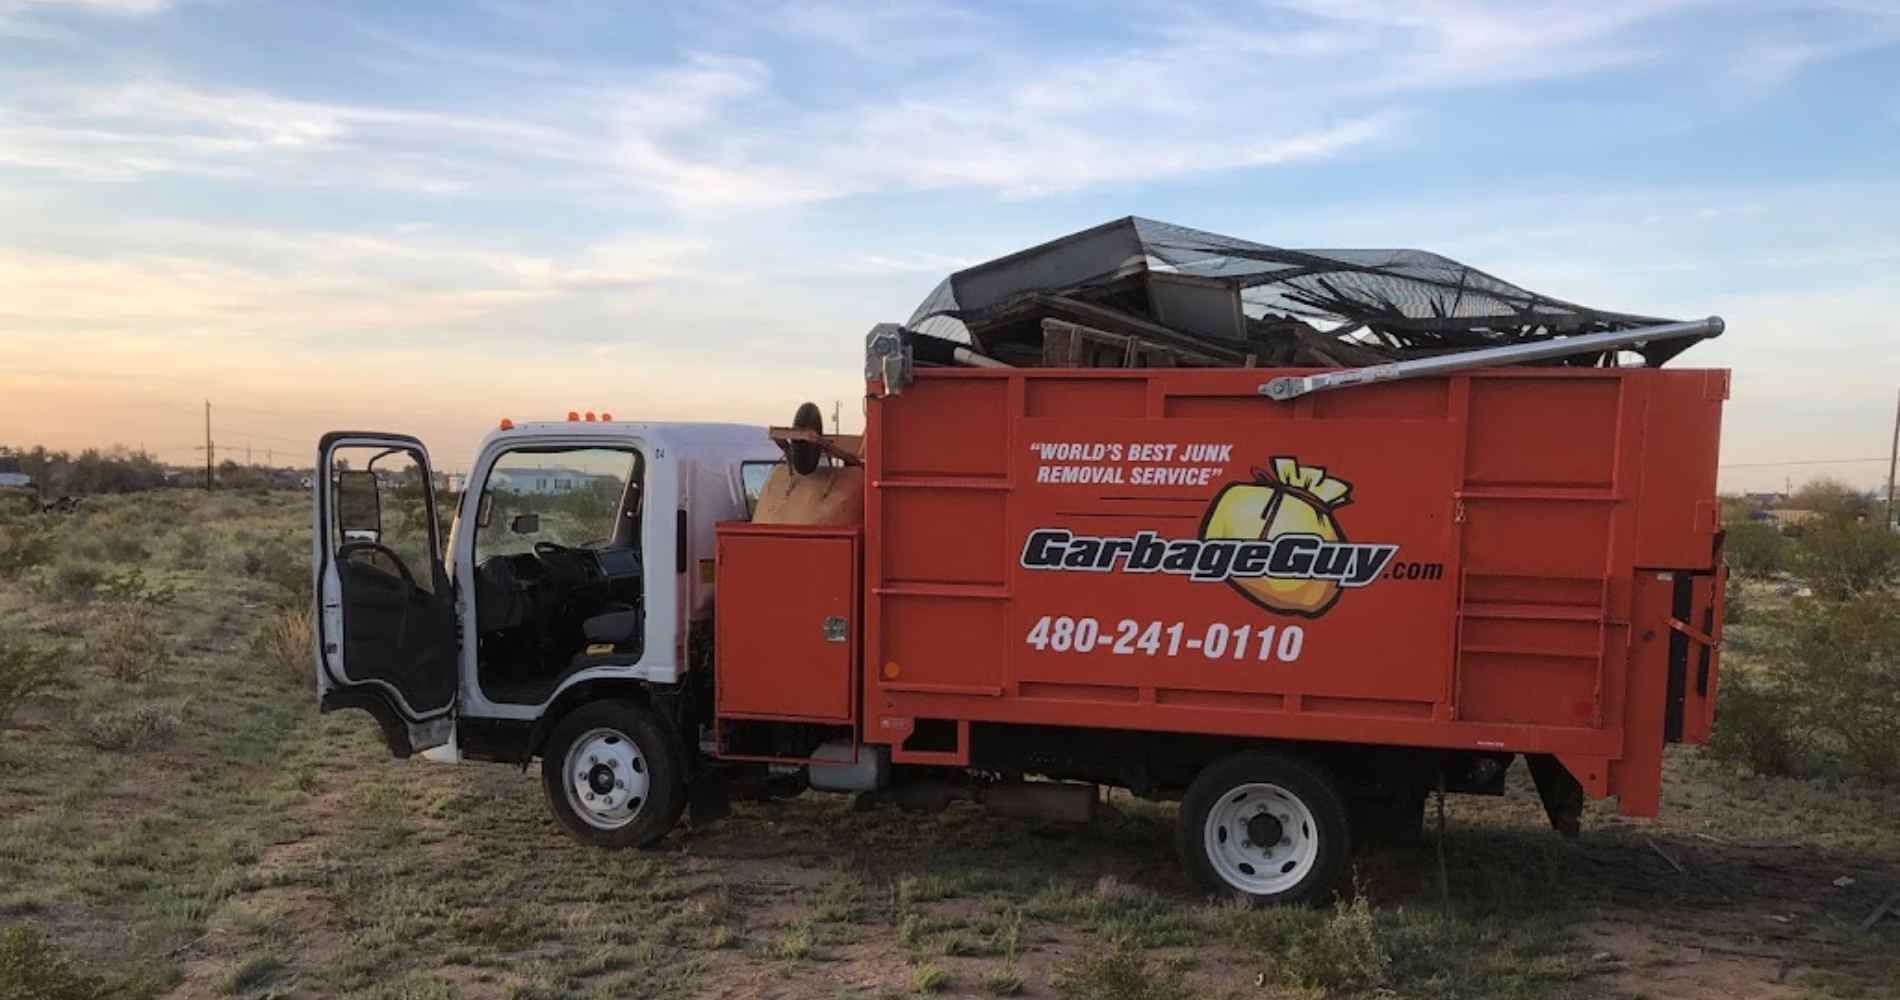 #1 for Junk Removal in Litchfield Park, AZ with Over 1200 5-Star Reviews!